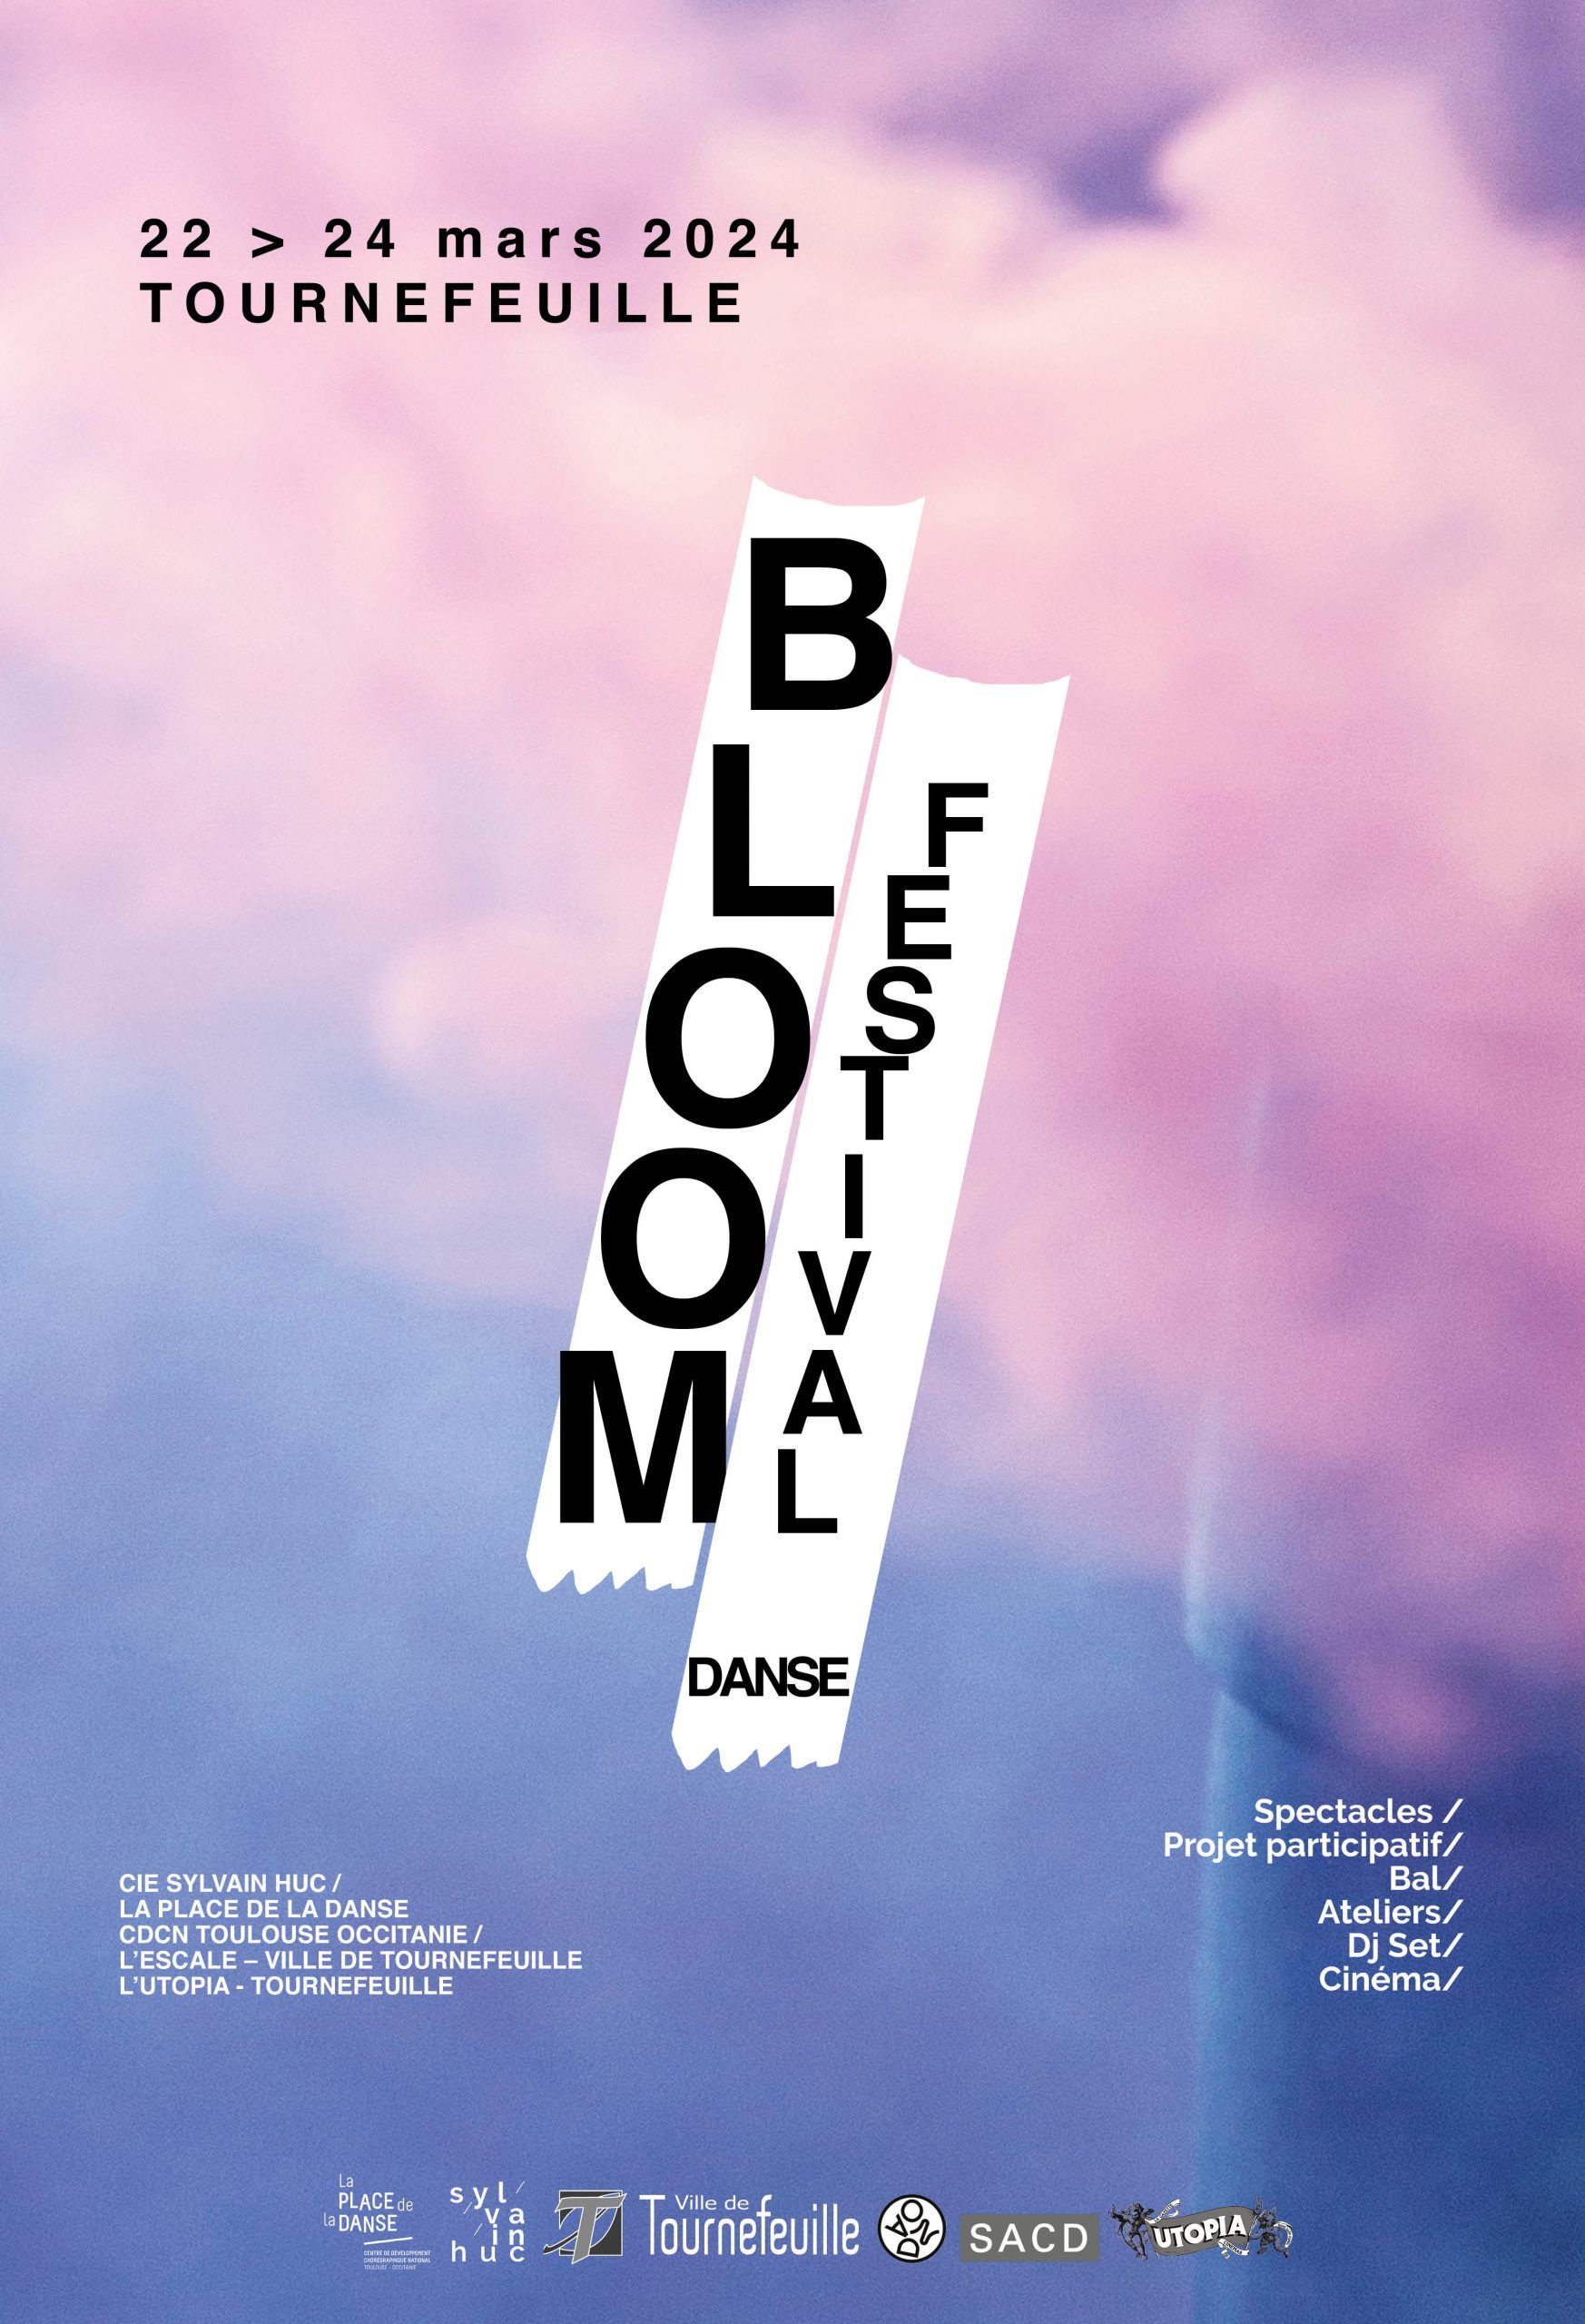 Bloom festival - Tournefeuille